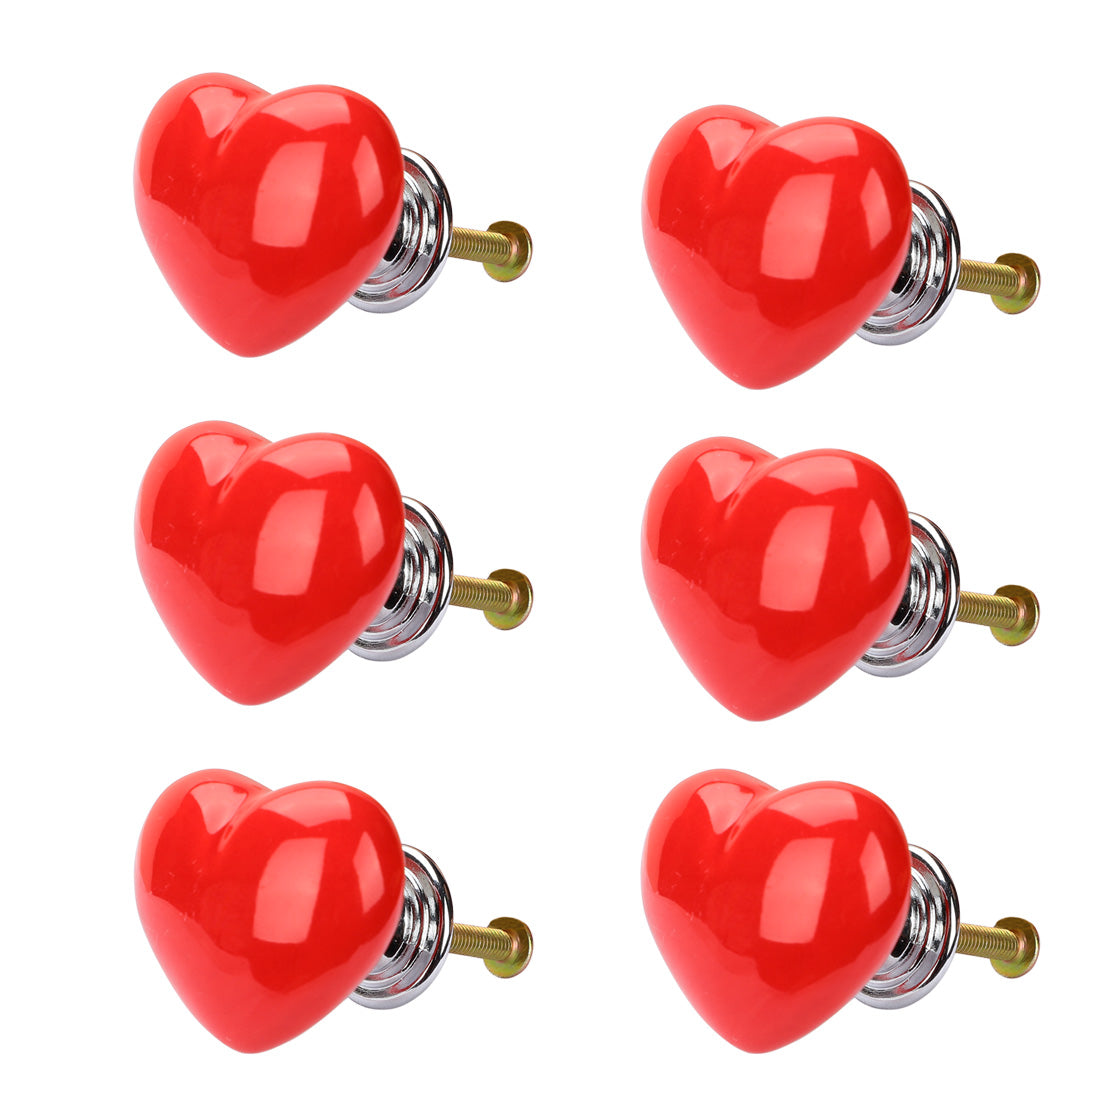 uxcell Uxcell Solid Ceramic Knob Heart Shaped Drawer Pull Handle Cupboard Wardrobe 6pcs Red